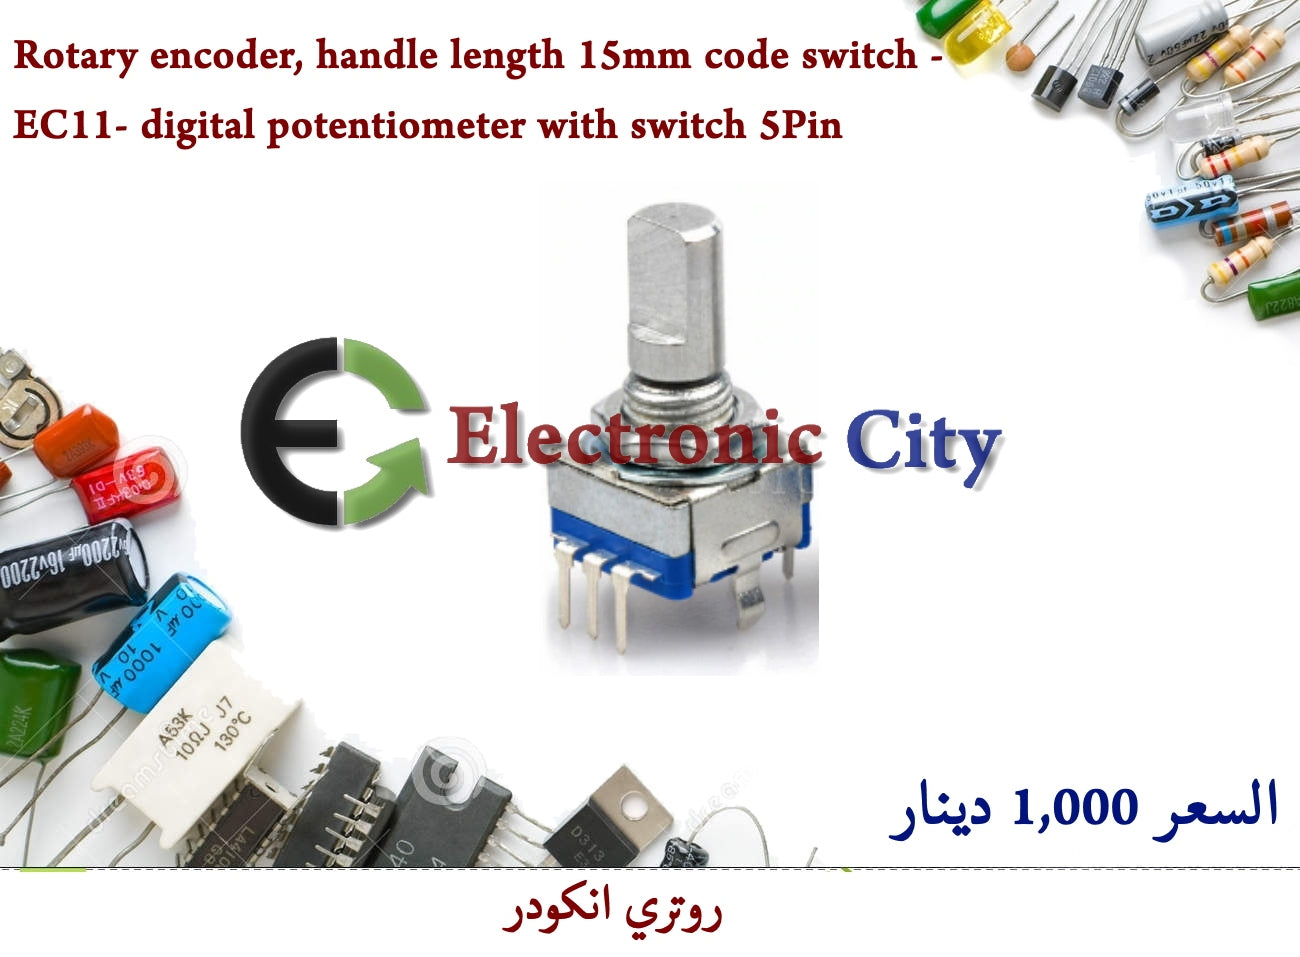 Rotary encoder, handle length 15mm code switch - EC11- digital potentiometer with switch 5Pin